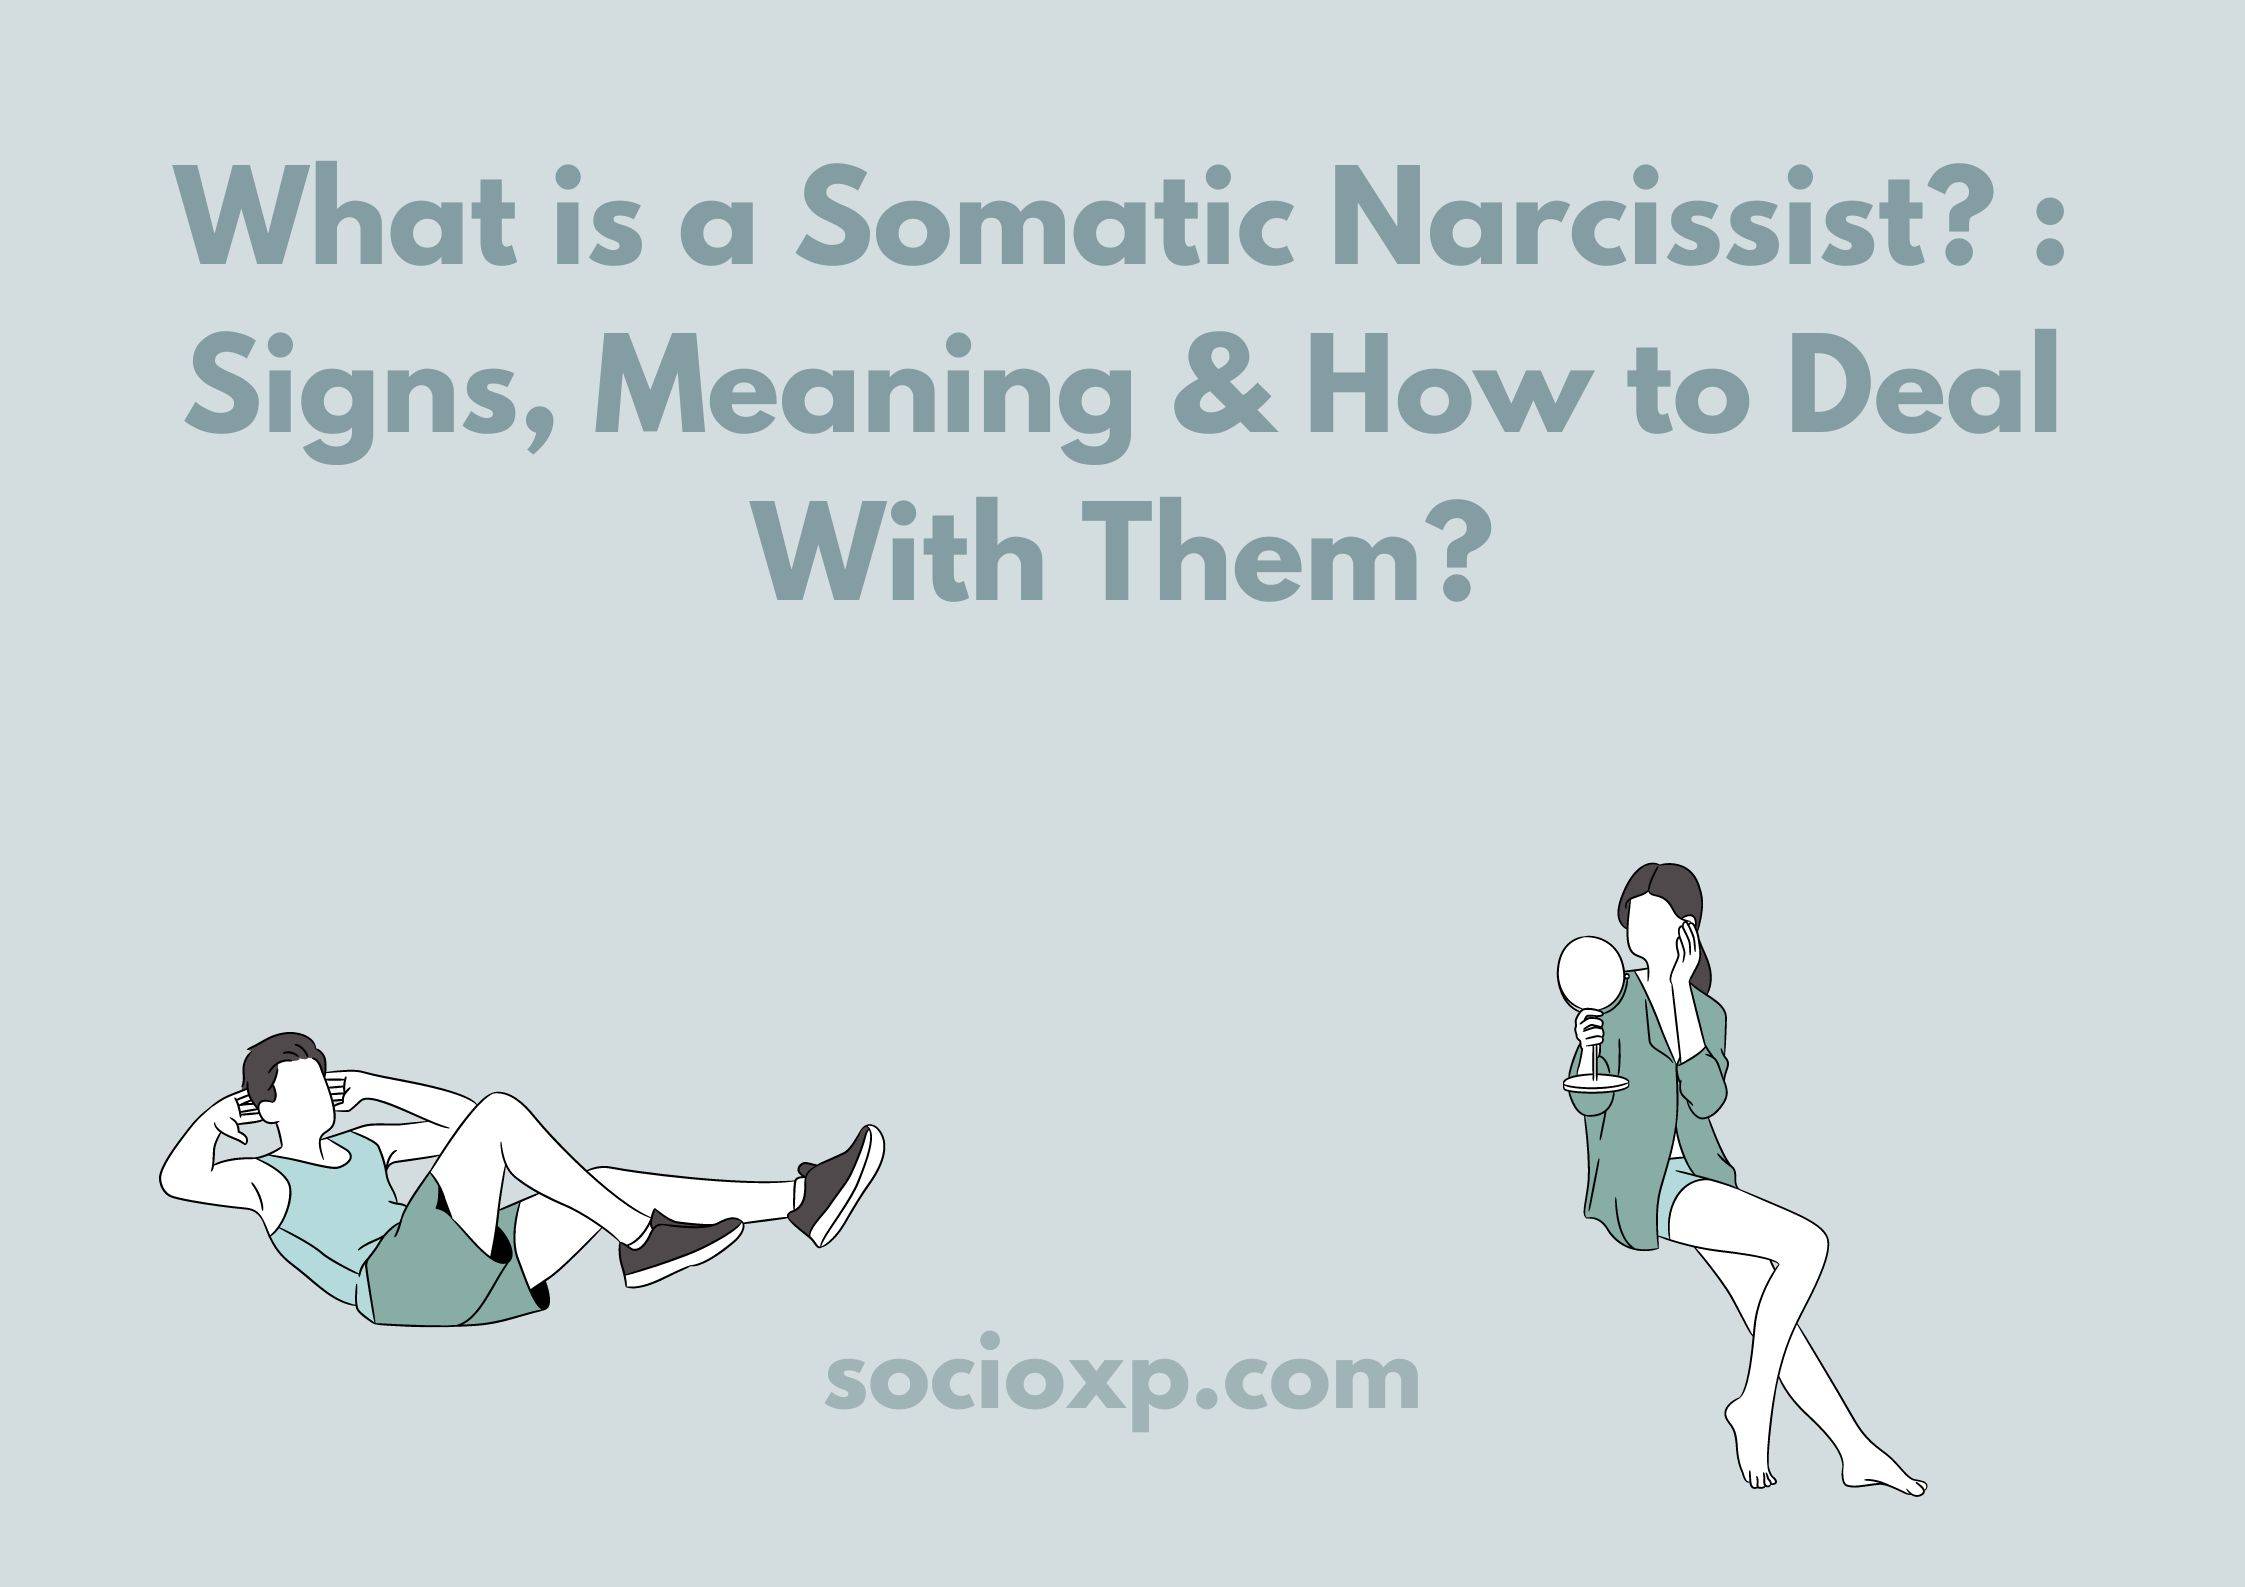 What is a Somatic Narcissist? : Signs, Meaning & How to Deal With Them?